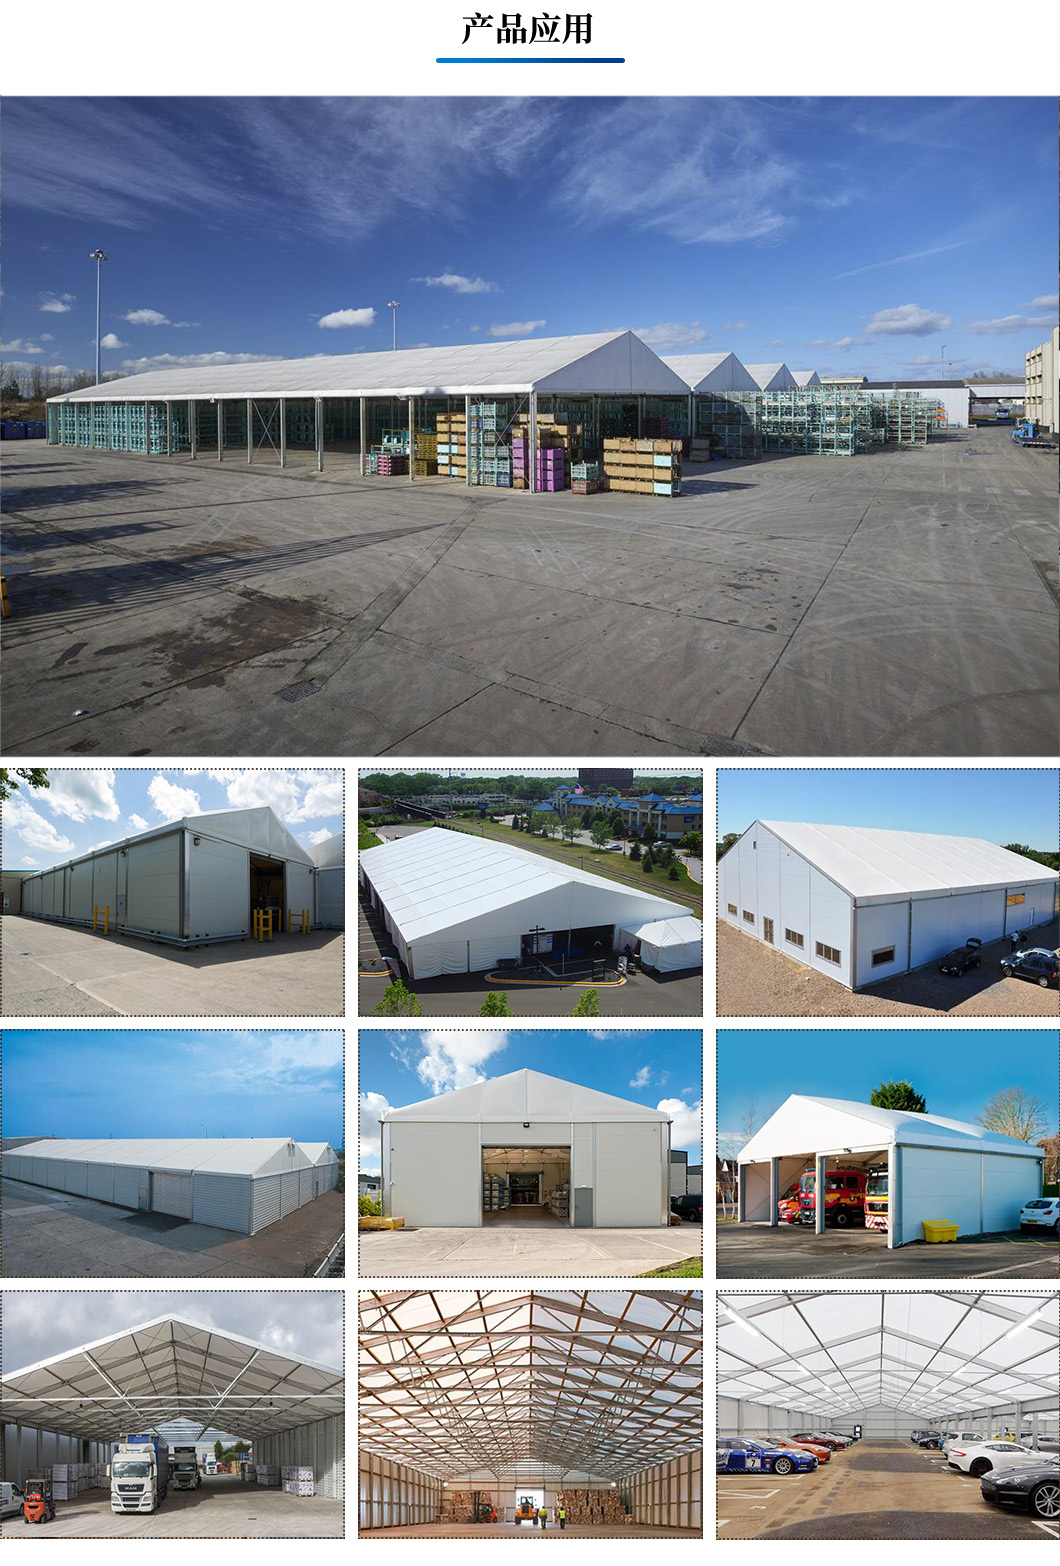 Industrial Warehouse Tent Outdoor Exhibition Car Show European Style Tent Large Activity Aluminum Alloy Tent Warehouse Tent